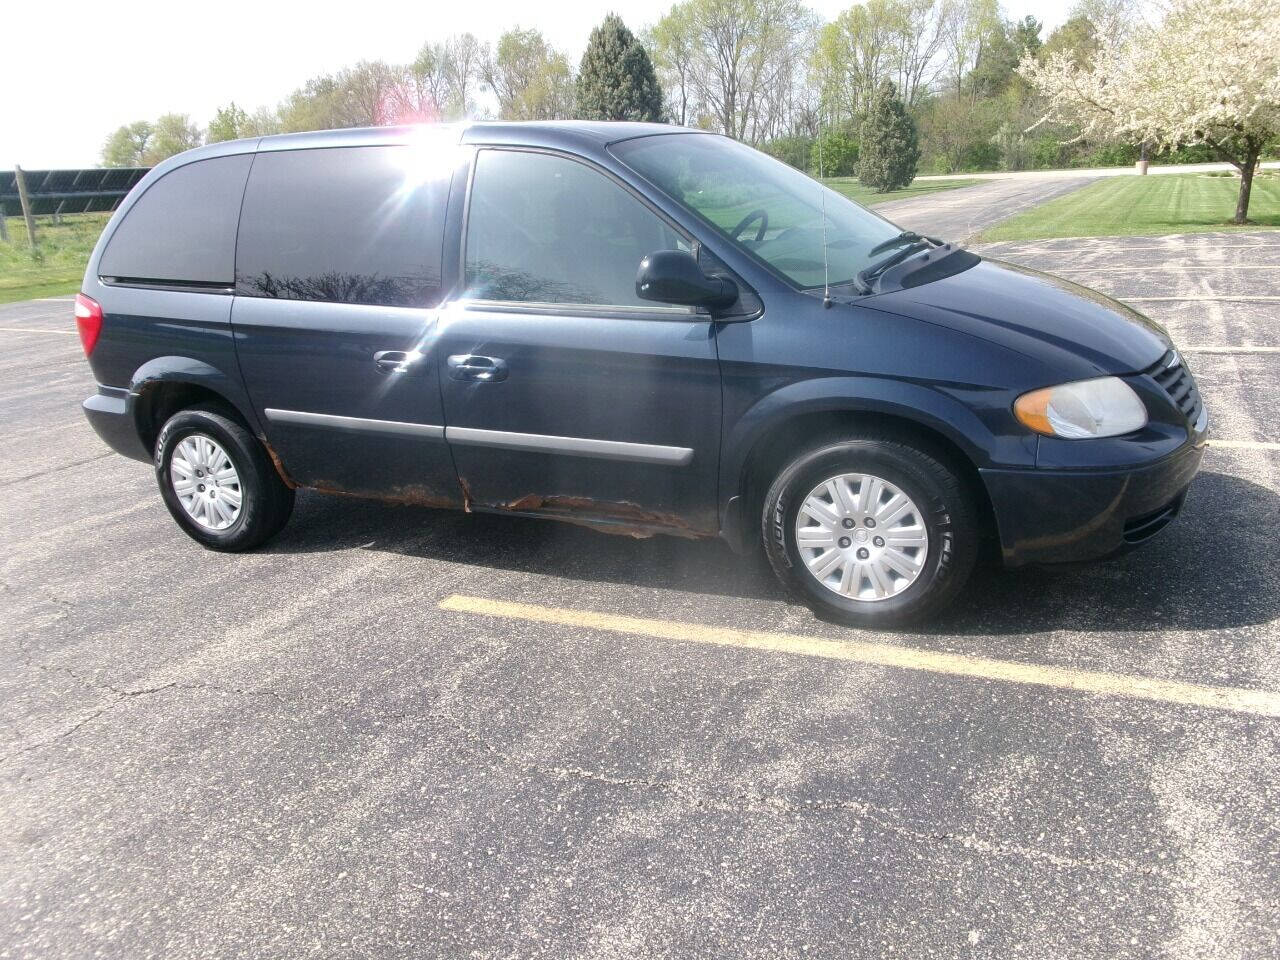 2006 Chrysler Town and Country For Sale In Illinois - Carsforsale.com®